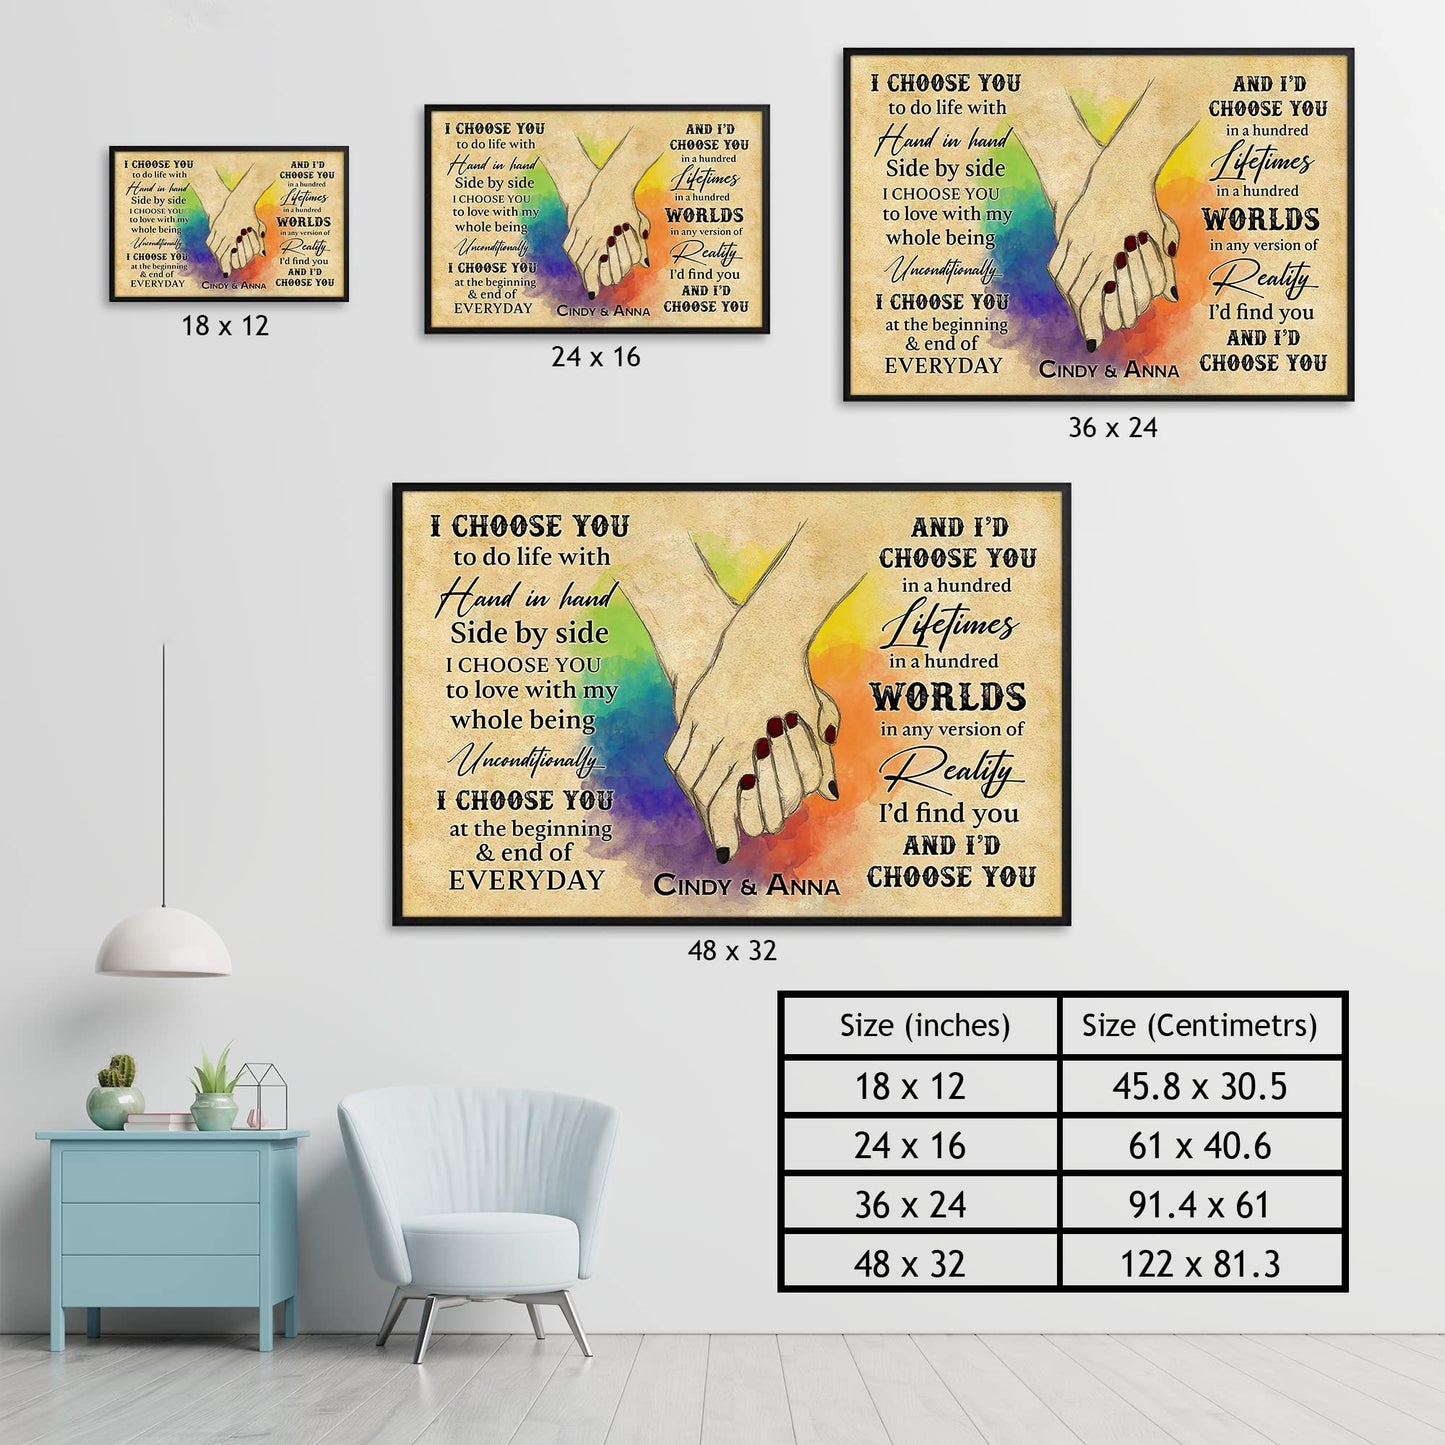 Personalized The Day I Met You Hands Holding Rainbow LGBT for Couple Gay Pride Lesbian Bedroom Decor Wedding Gift Lover Poster Canvas 1.5in Framed Prints Wall Art Home Decor Artwork Picture (Style 3)